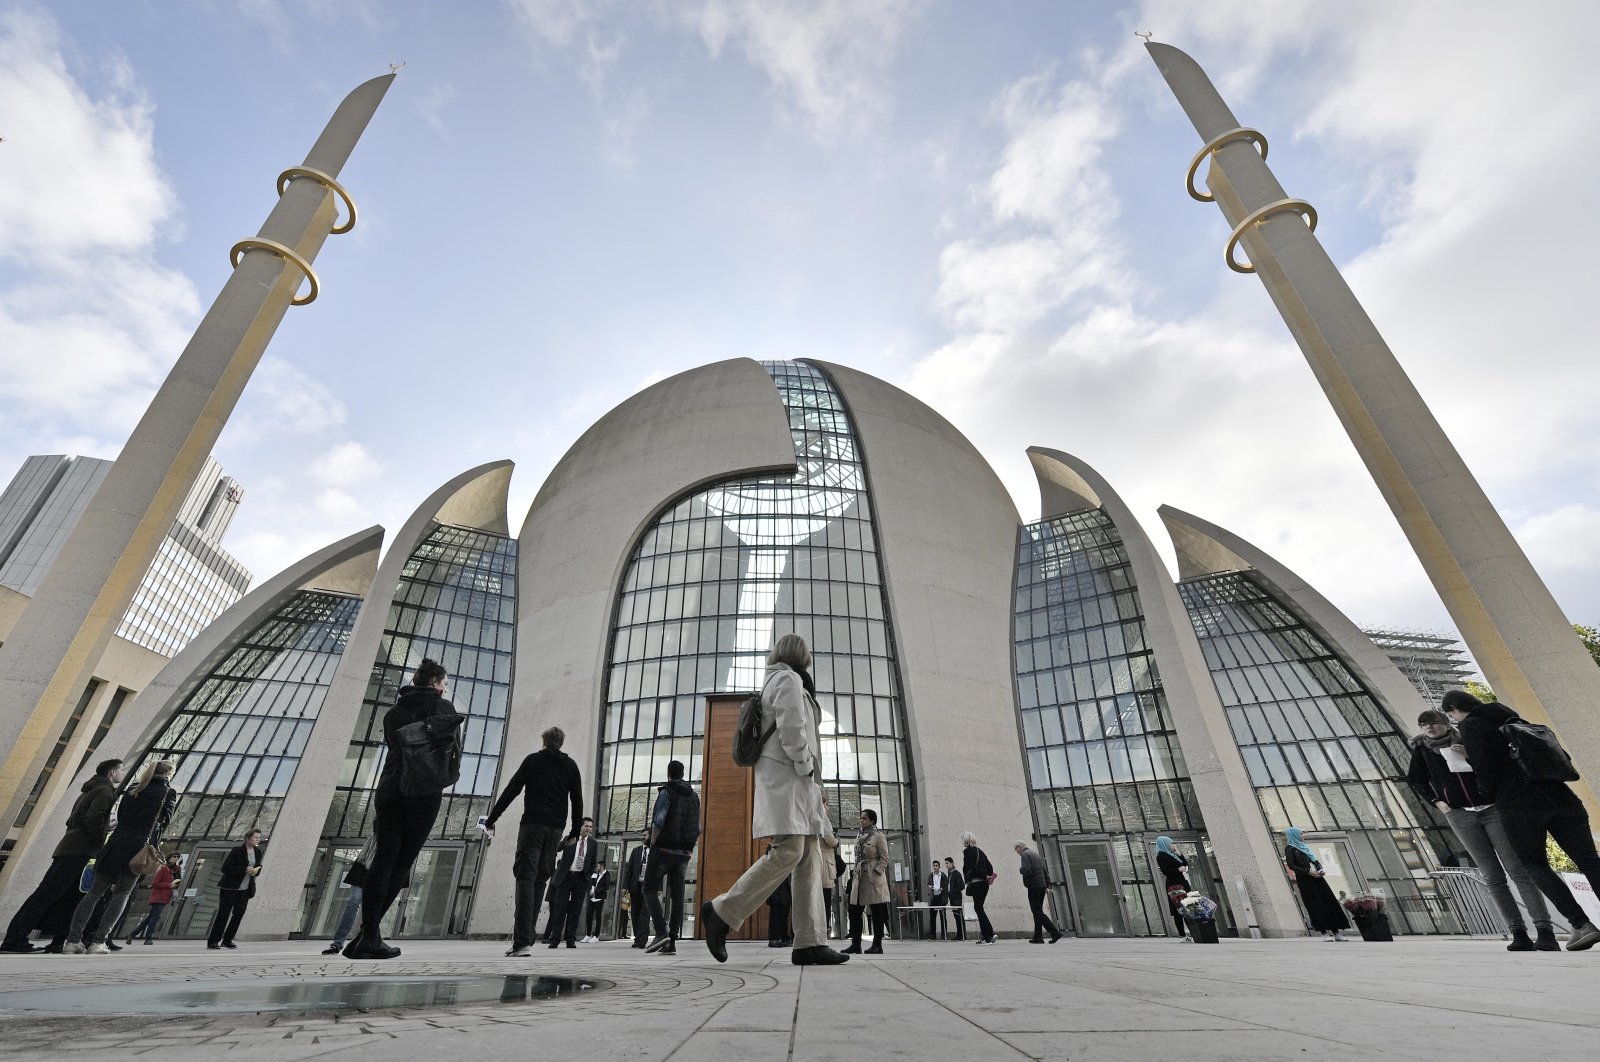 People stand outside the central mosque on the "Day of Open Mosques" in Cologne, Germany, Oct. 3, 2017. (AP File Photo)